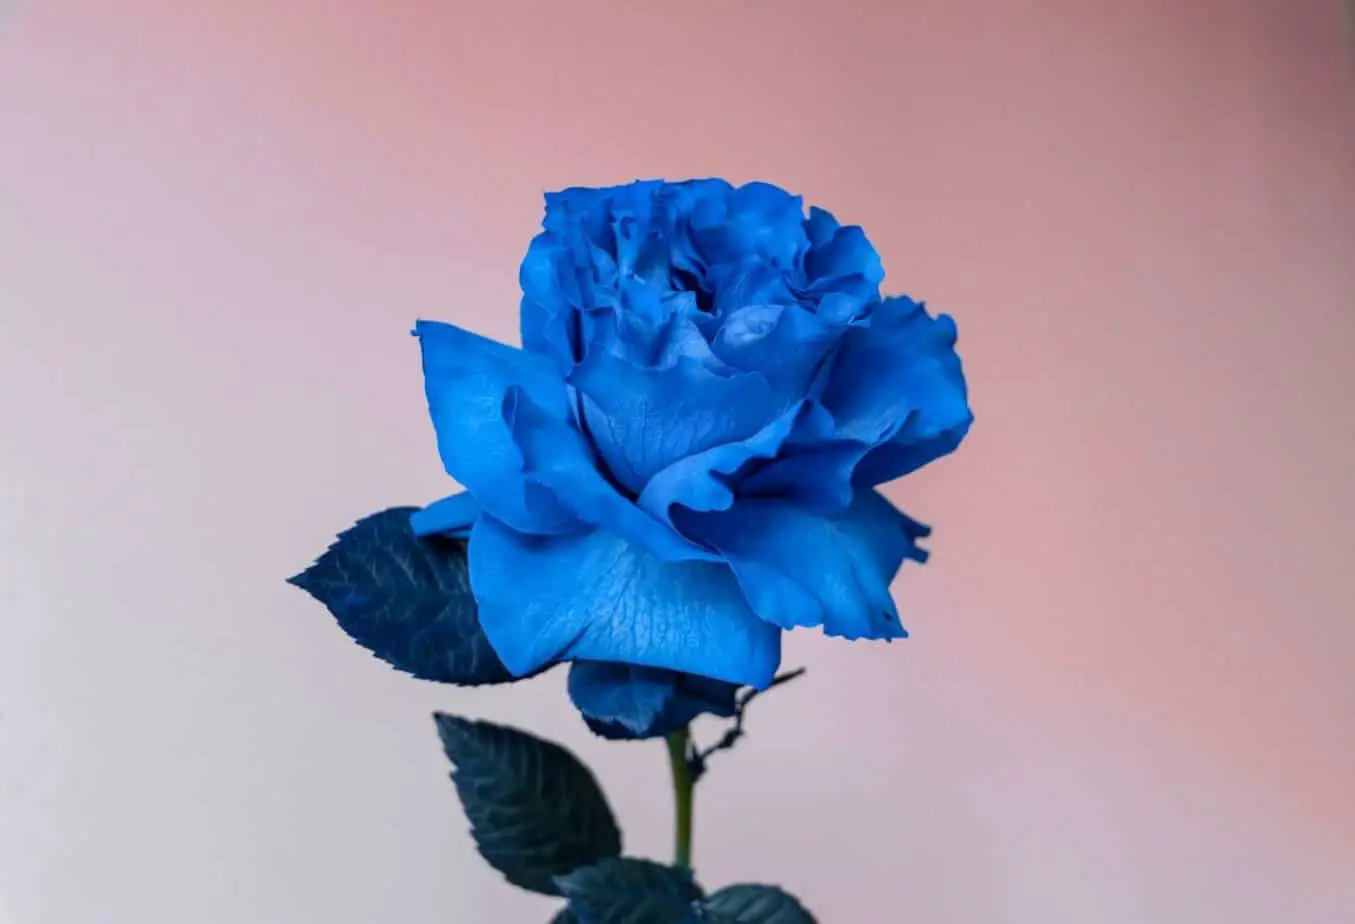 History Of The Blue Rose